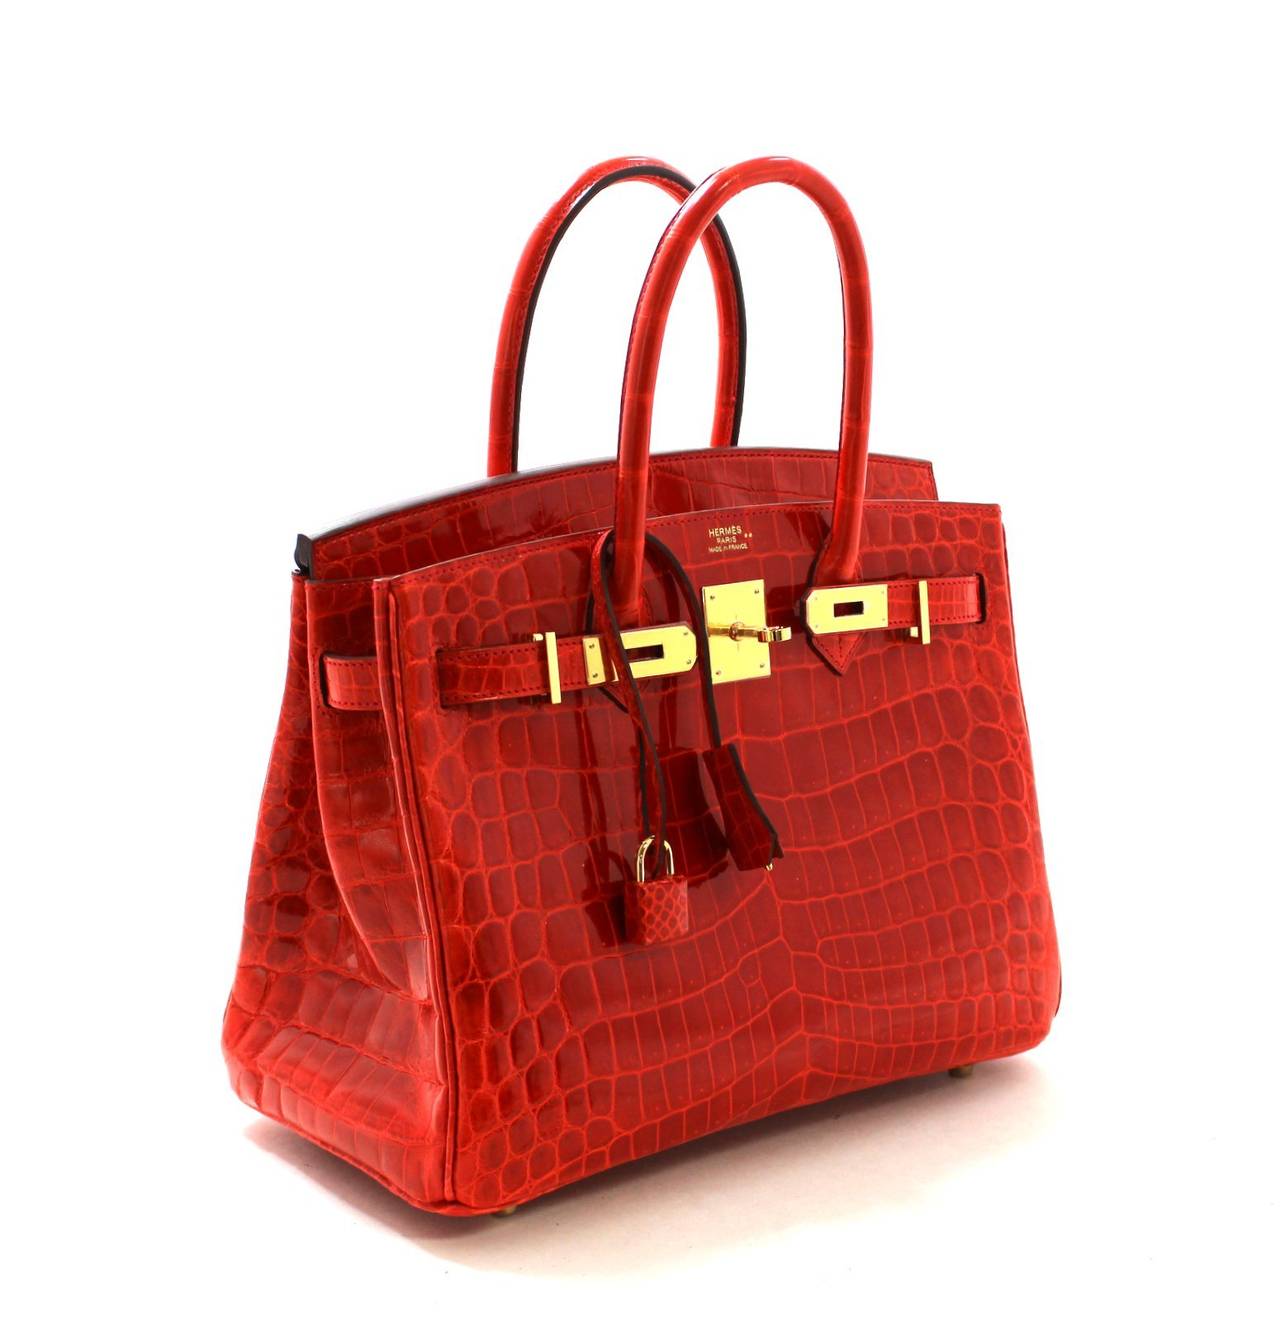 Hermes Birkin in Geranium Crocodile- 30 cm size RED GHW In New Condition For Sale In New York City & Hamptons, NY